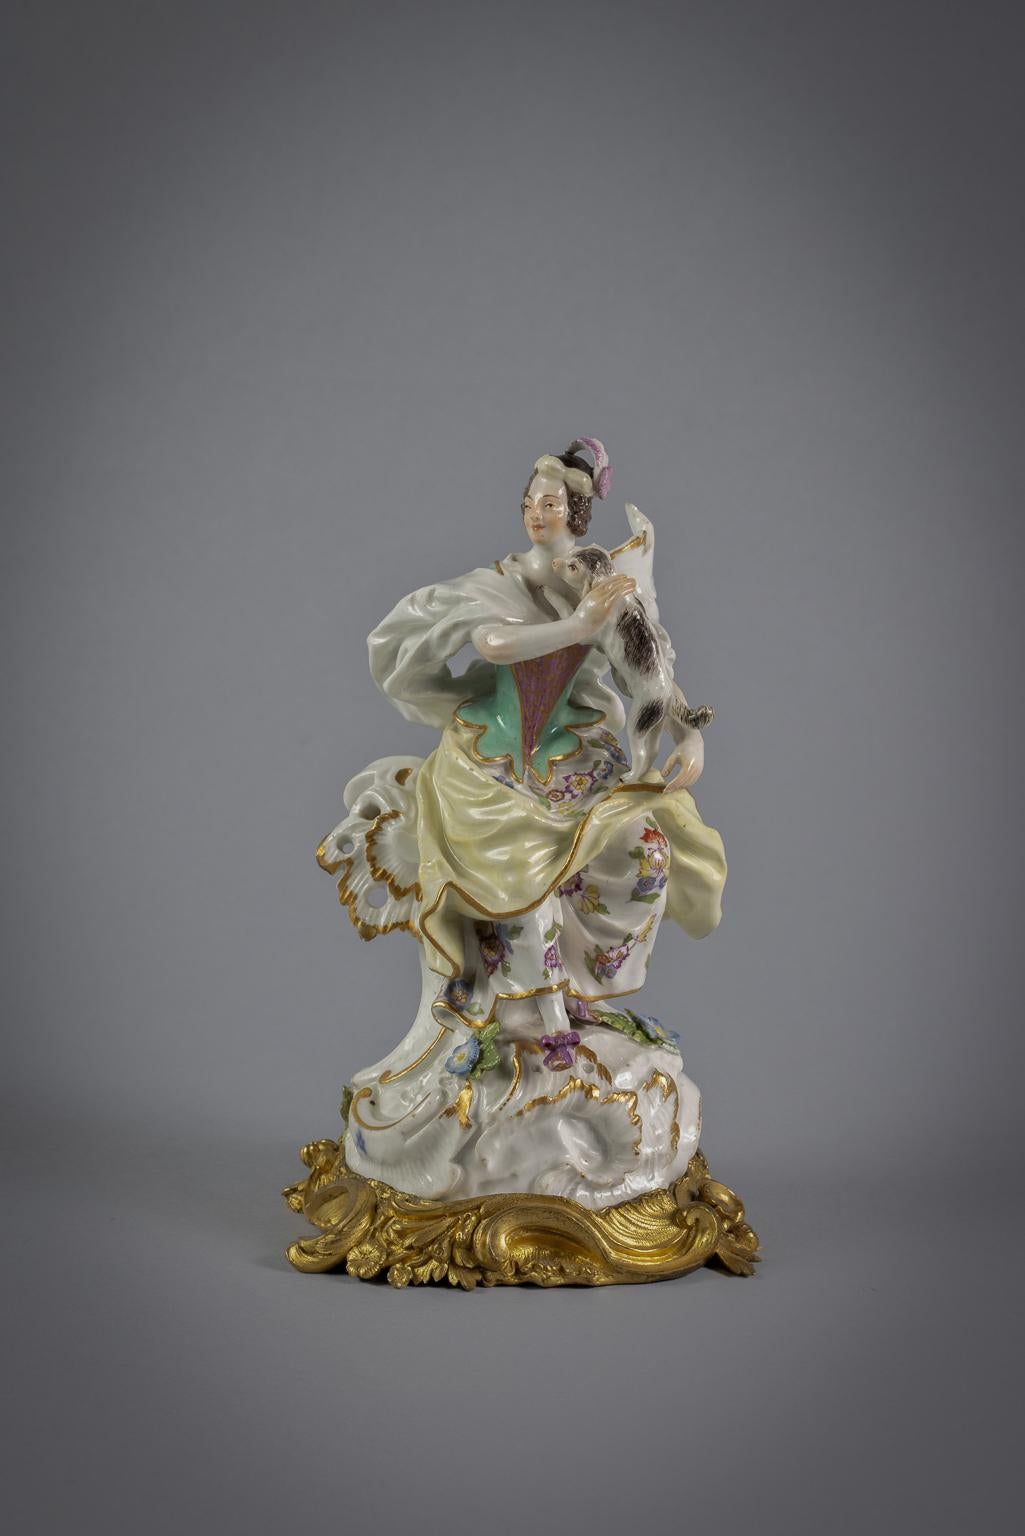 Marked Meissen. With 18th century French gilt bronze mounts. Modeled by Friederich Elias Meyer.